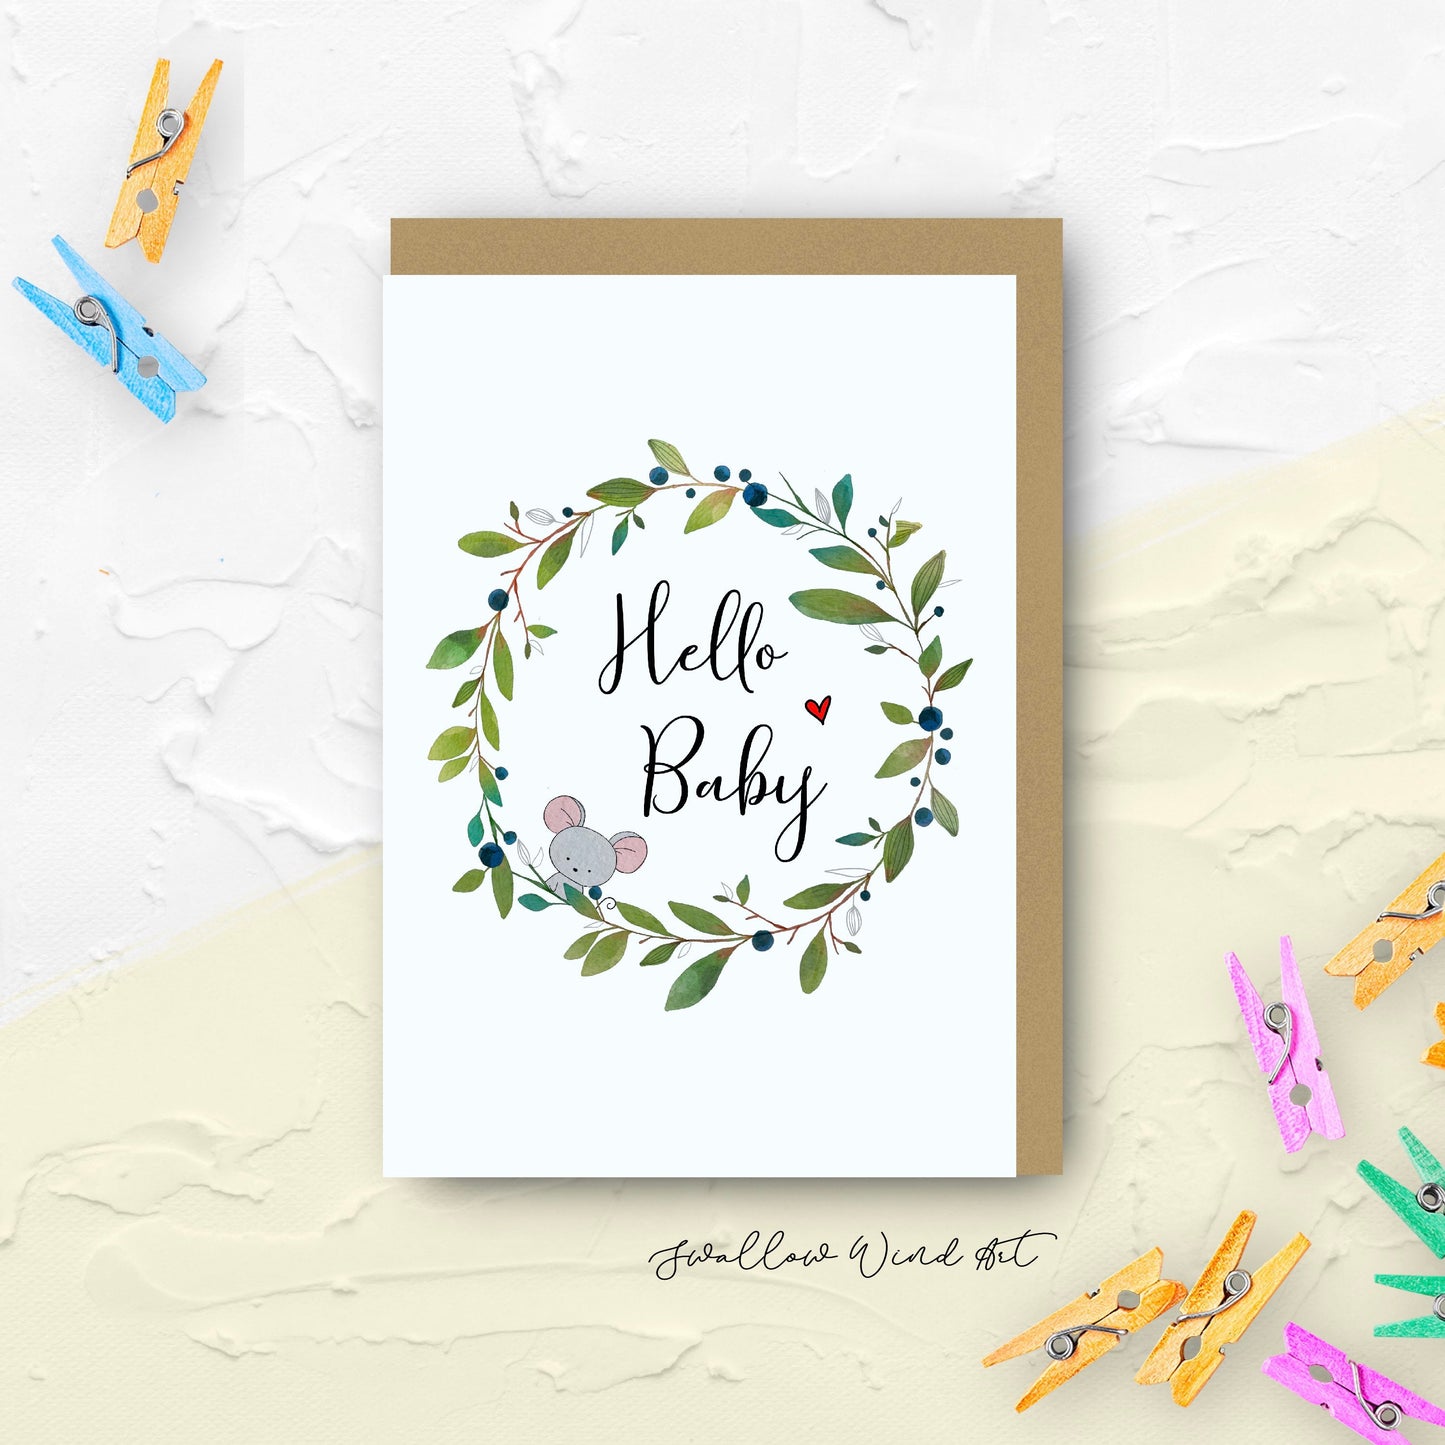 Greeting card with illustration of a wreath. Center of the wreath are the words "Hello Baby" with a little mouse peeping out and red love heart on either side